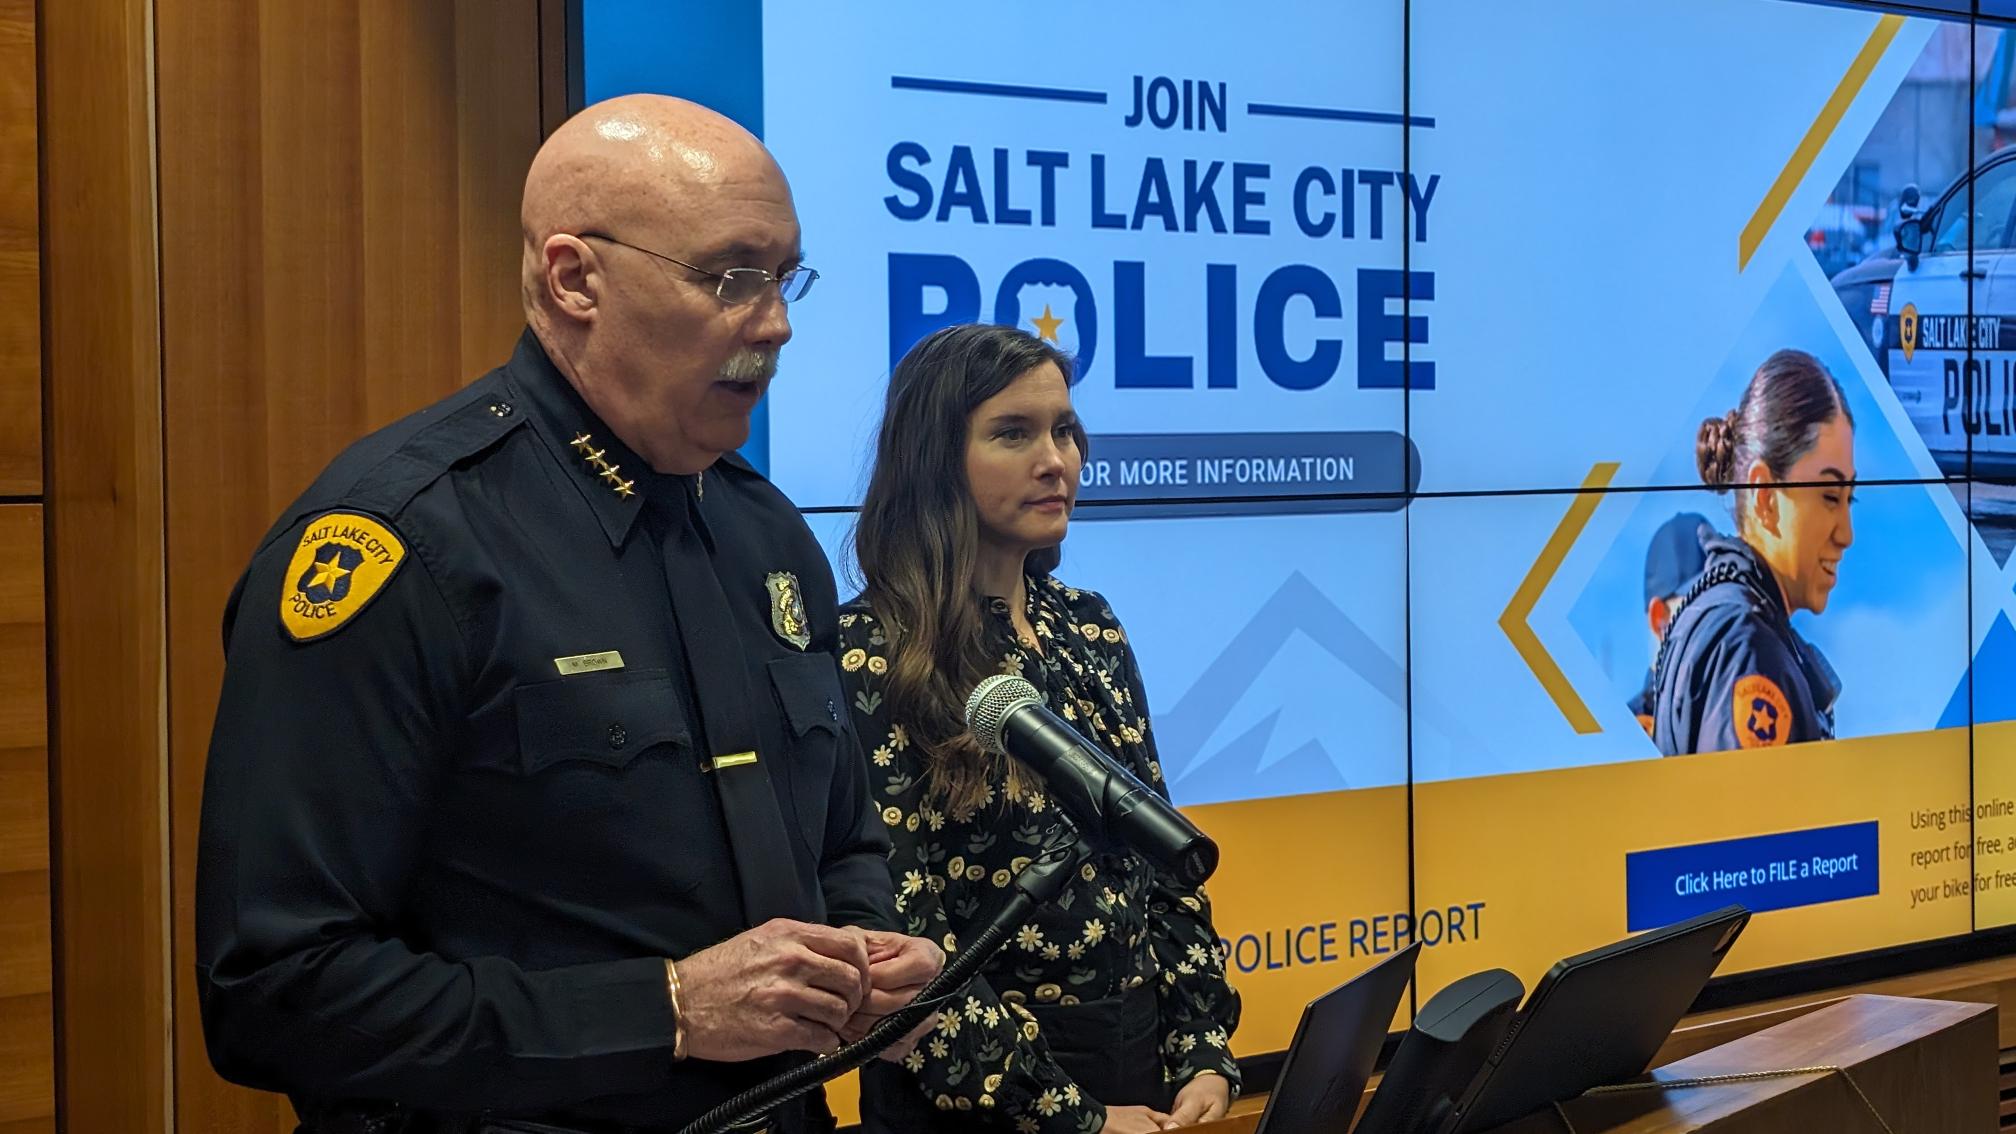 Salt Lake City Police Chief Mike Brown, left, and Salt Lake City Mayor Erin Mendenhall, right, anno...